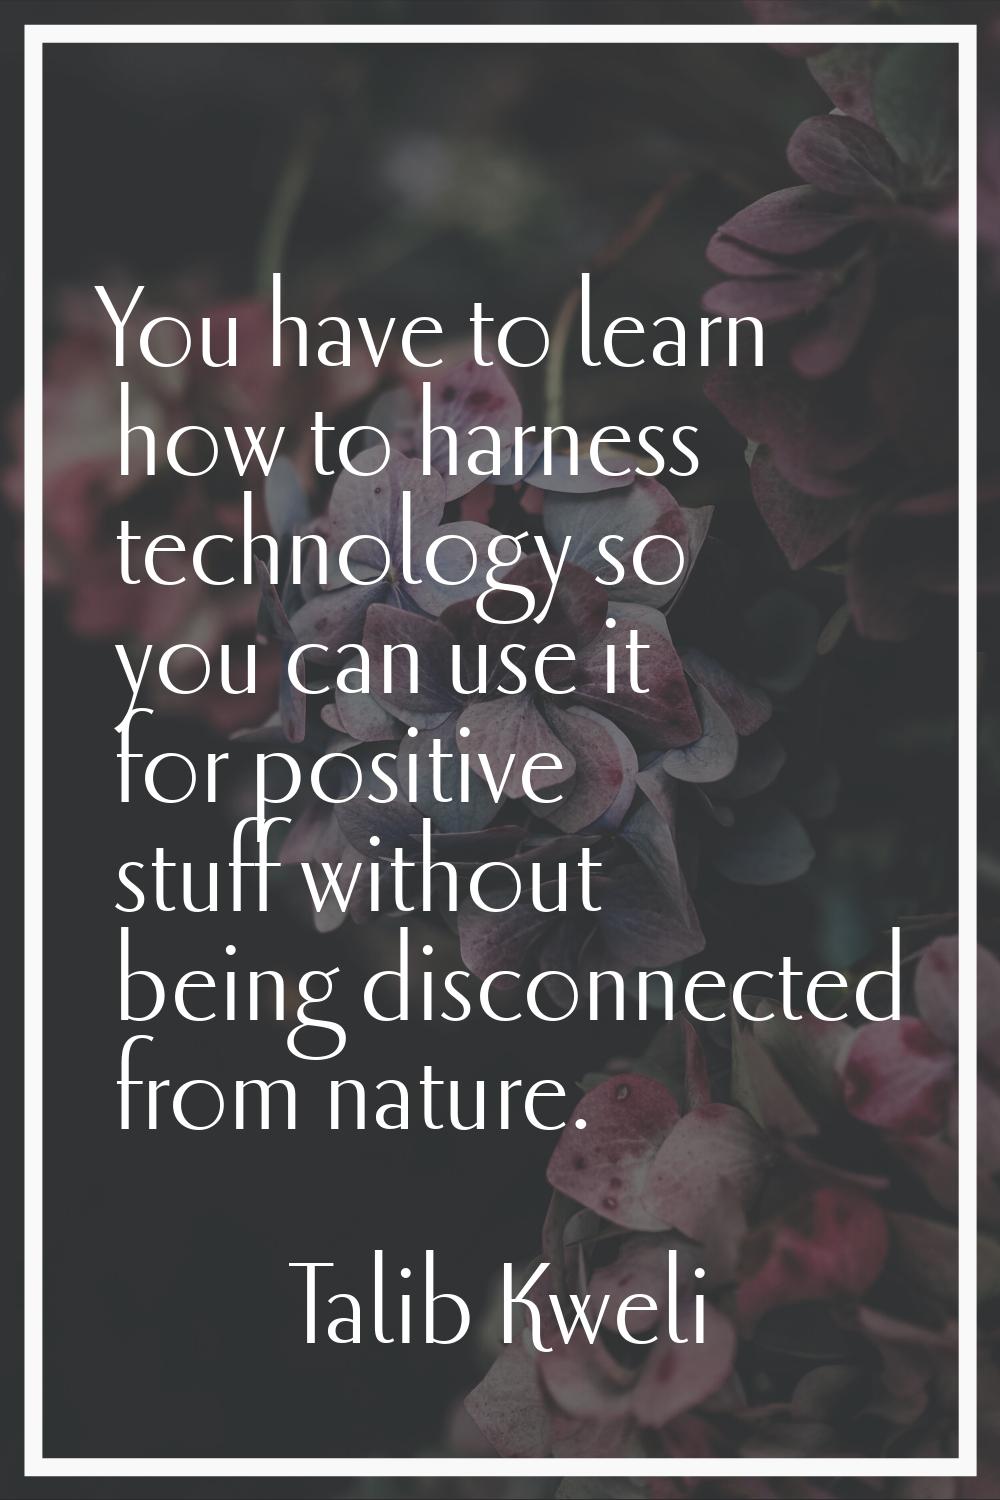 You have to learn how to harness technology so you can use it for positive stuff without being disc